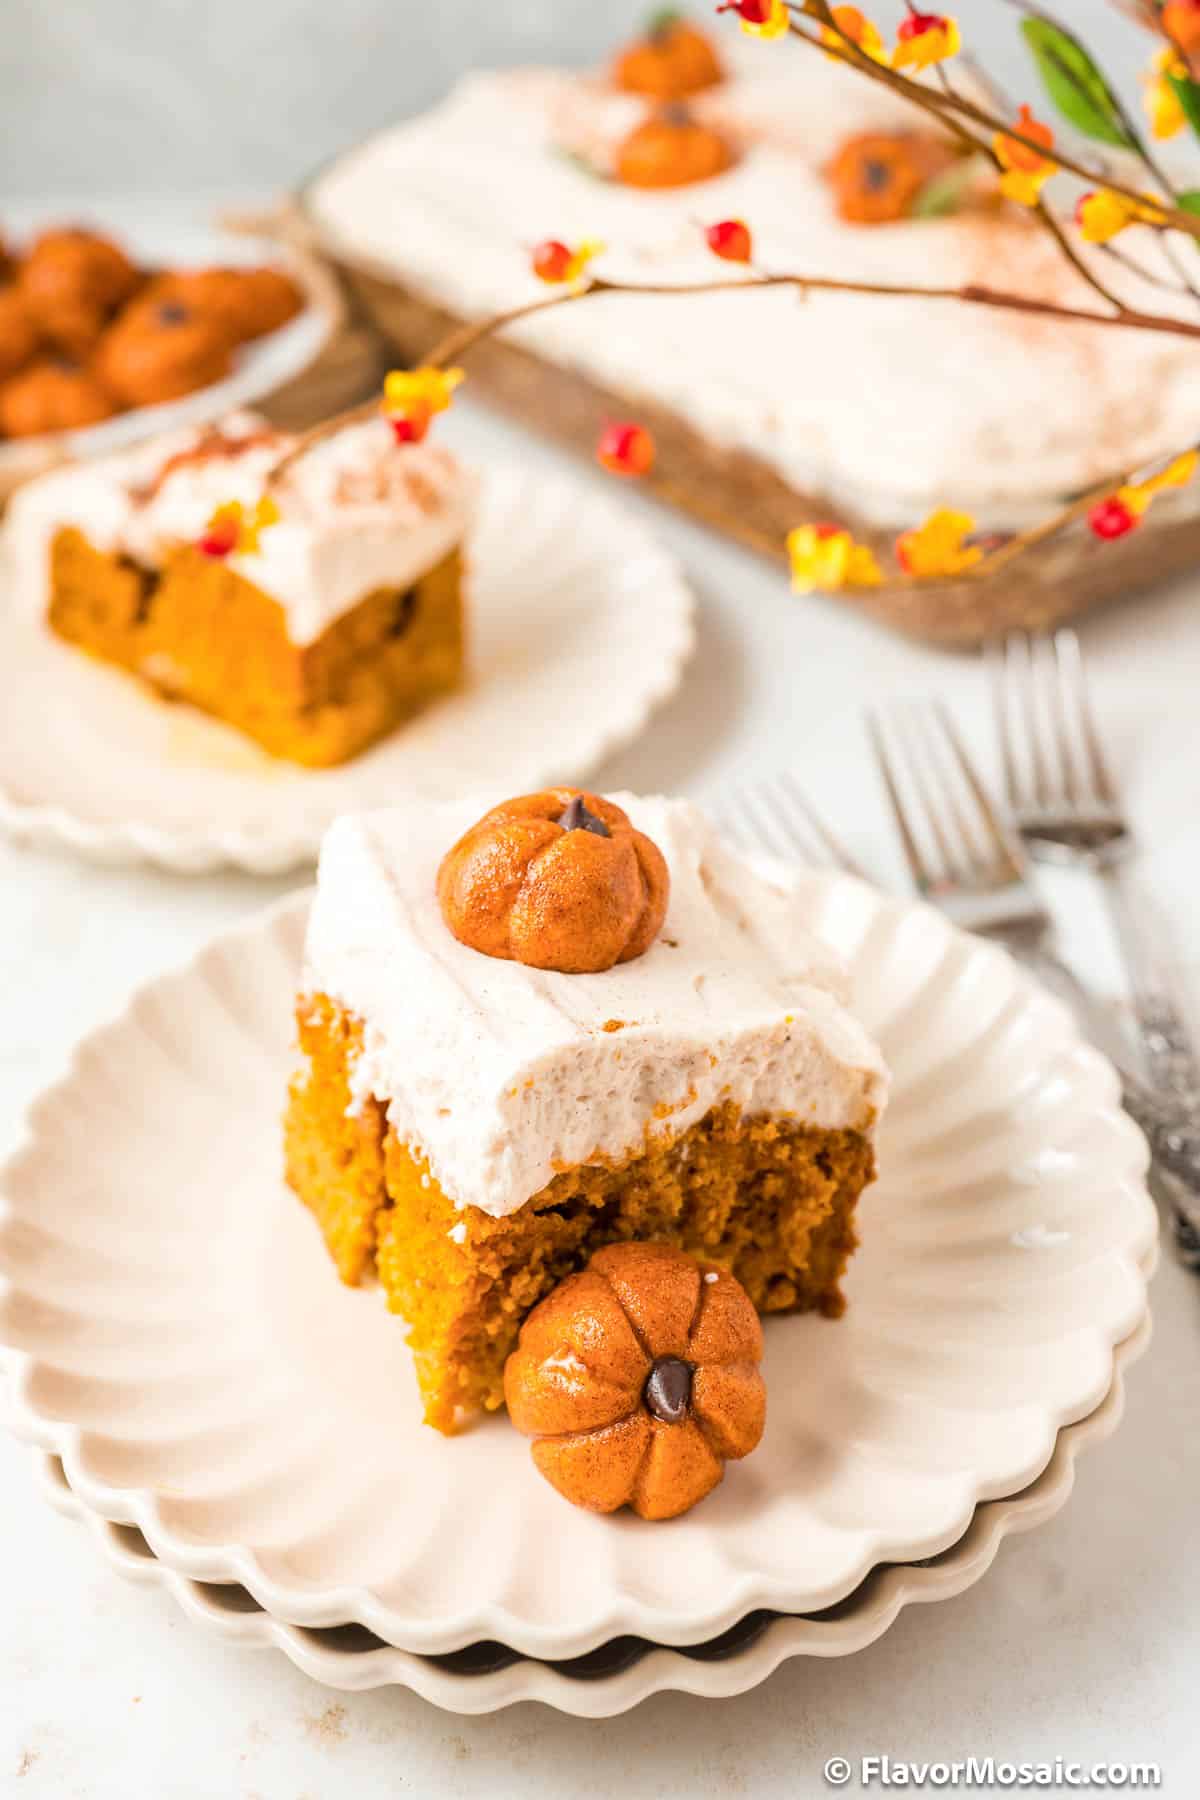 A small white plate with a single serving of Pumpkin Tres Leches Cake topped with a small mini pumpkin with another mini pumpkin on the side. 3 forks next to the plate, with another single serving on a white plate behind that and in the top right is a whole 9x13 cake pan with Pumpkin Tres Leches Cake topped with mini pumpkin and a sprinkle of cinnamon. In the upper left of the photo is a partial view of a white plate with multiple mini pumpkin decorations.